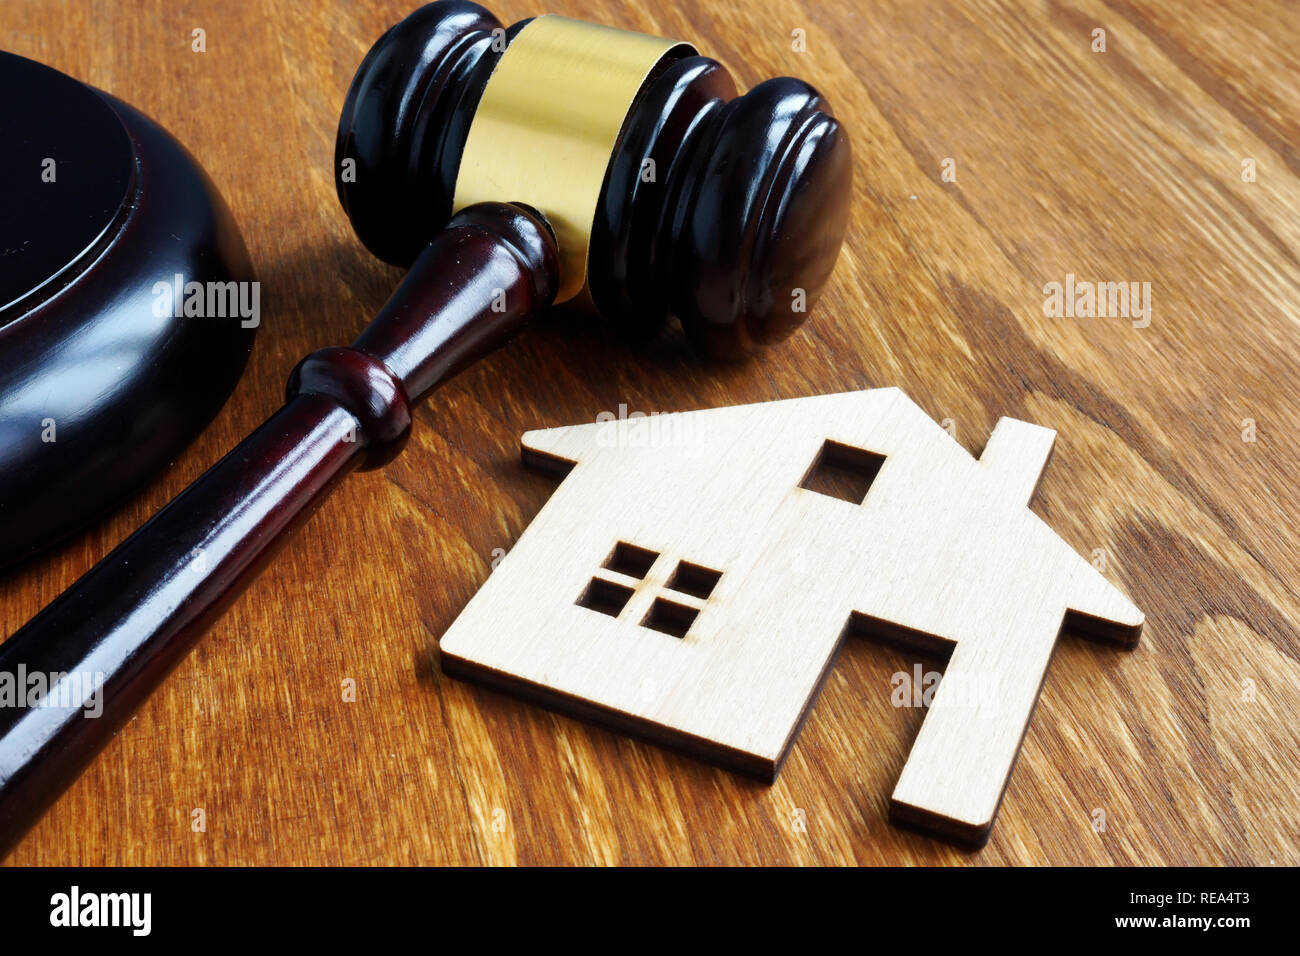 Real estate and property law. House model and gavel. Stock Photo